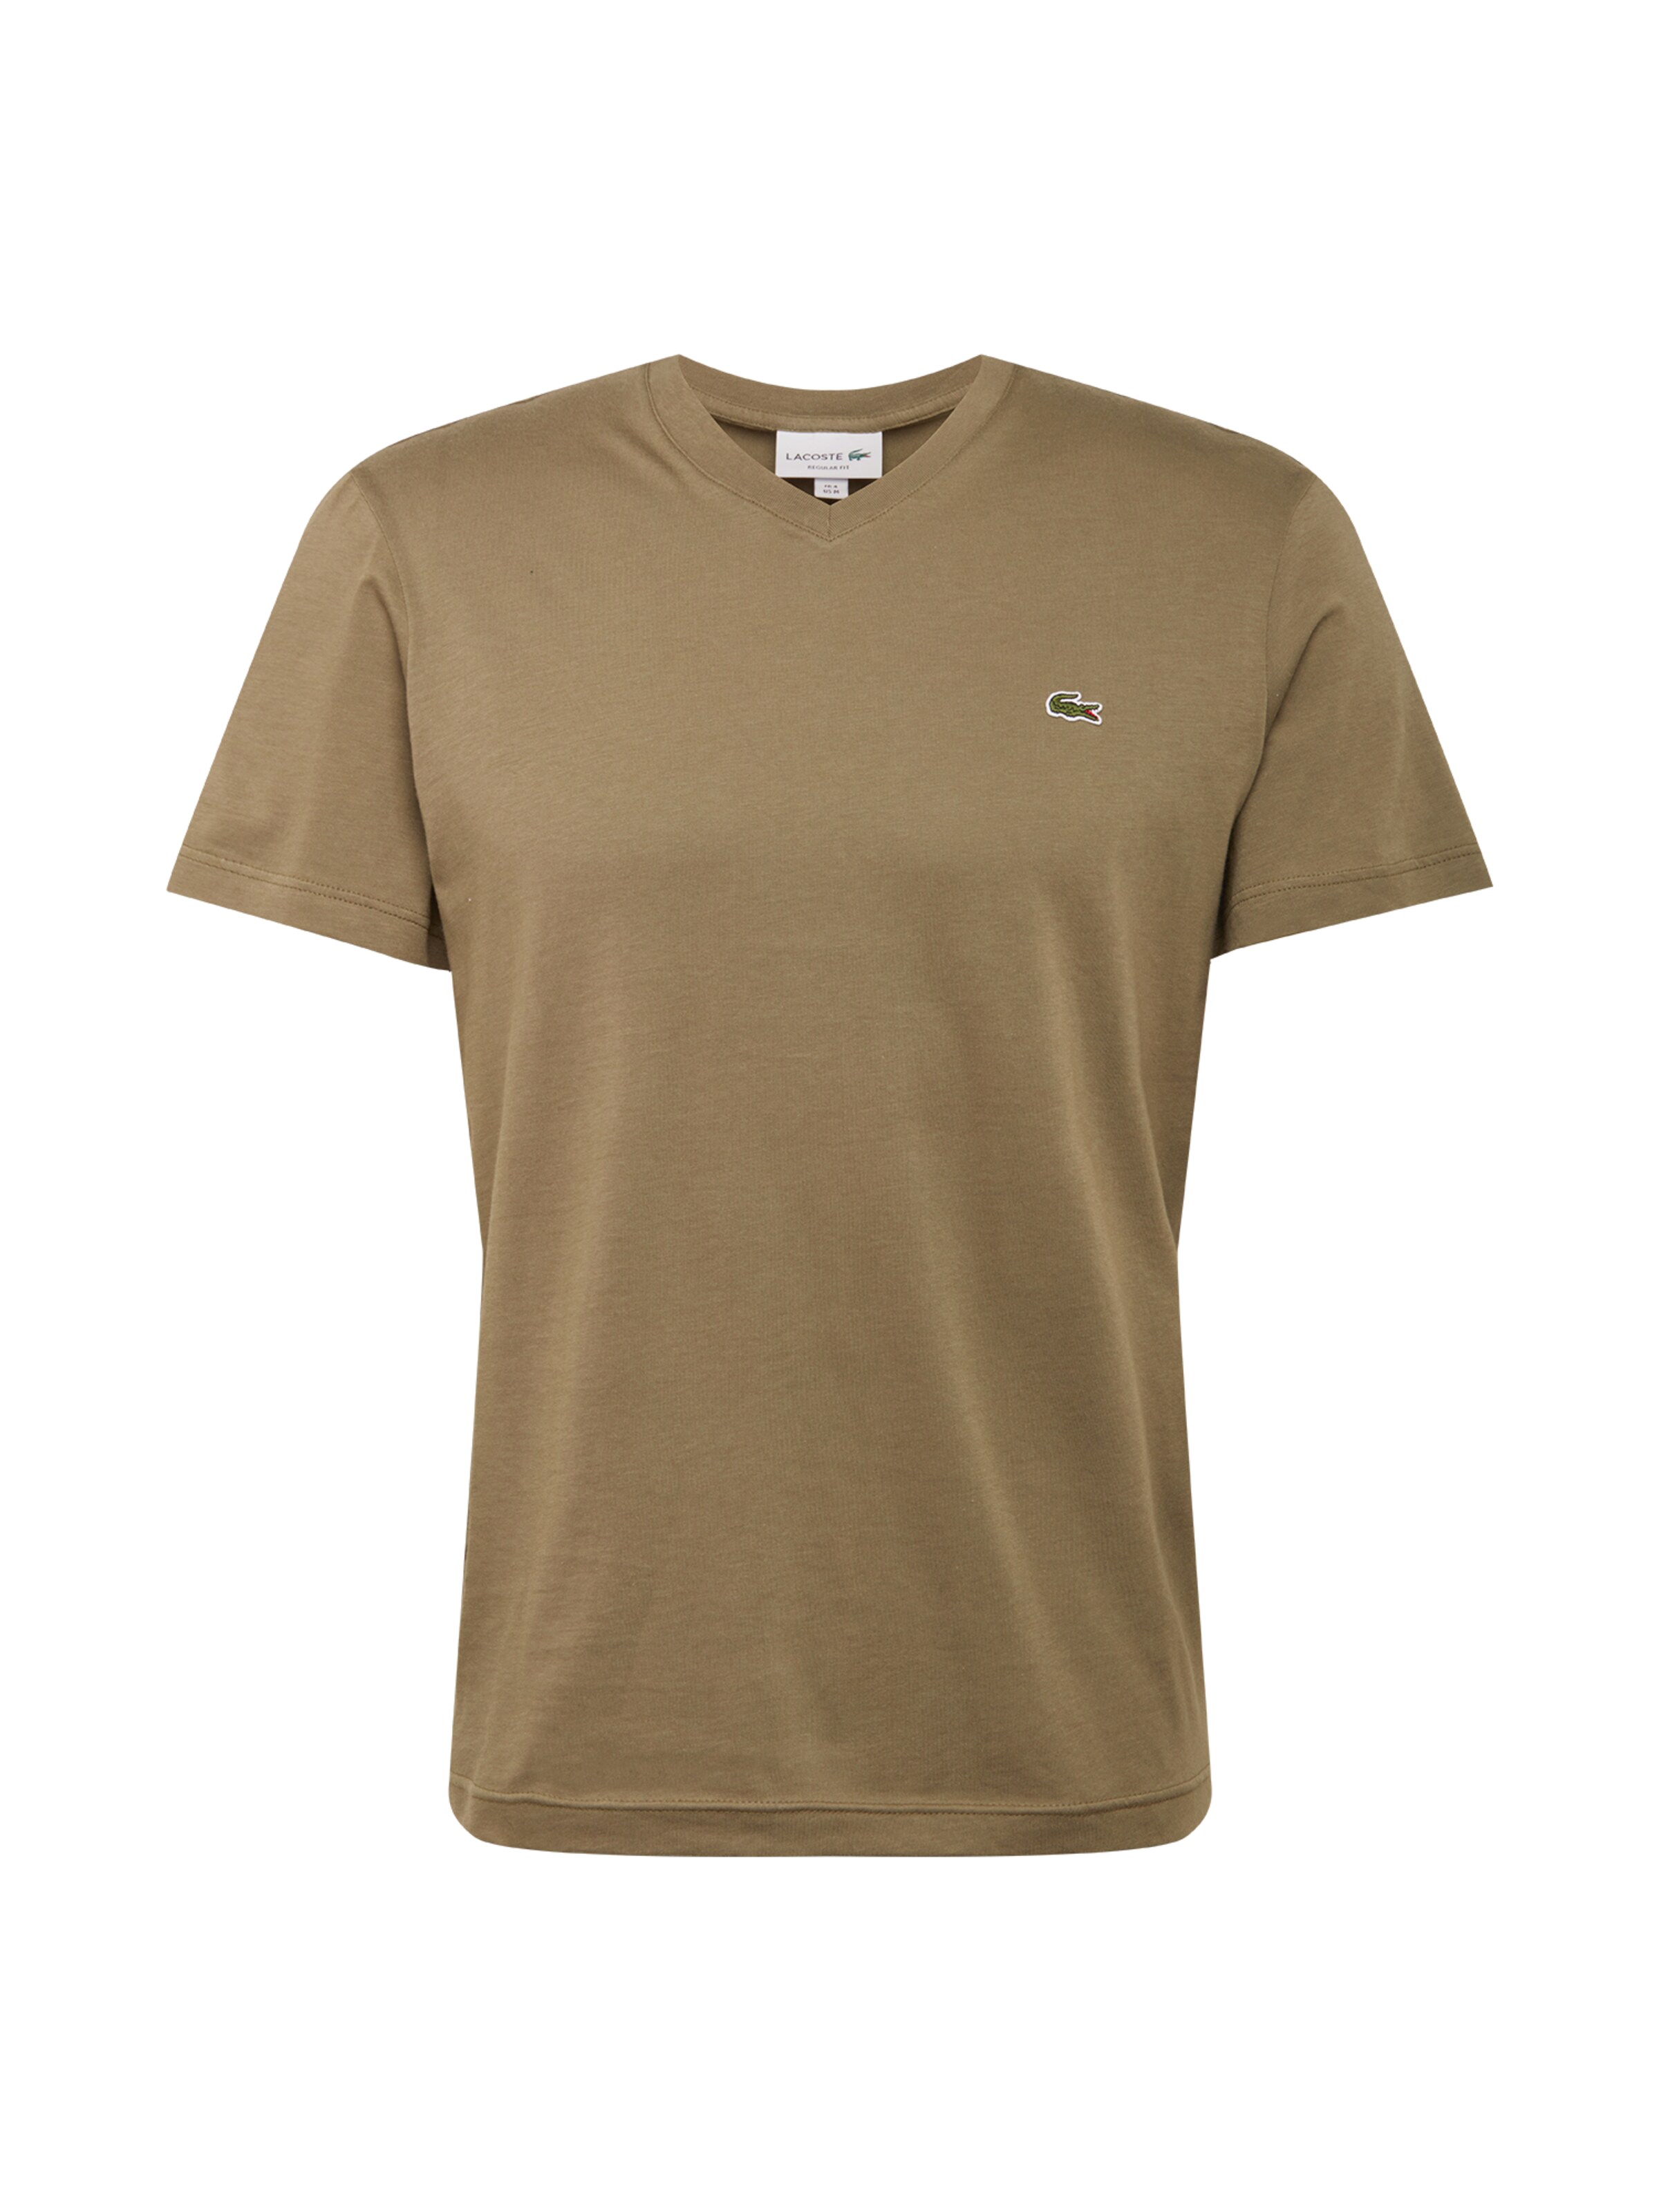 brown lacoste shirt